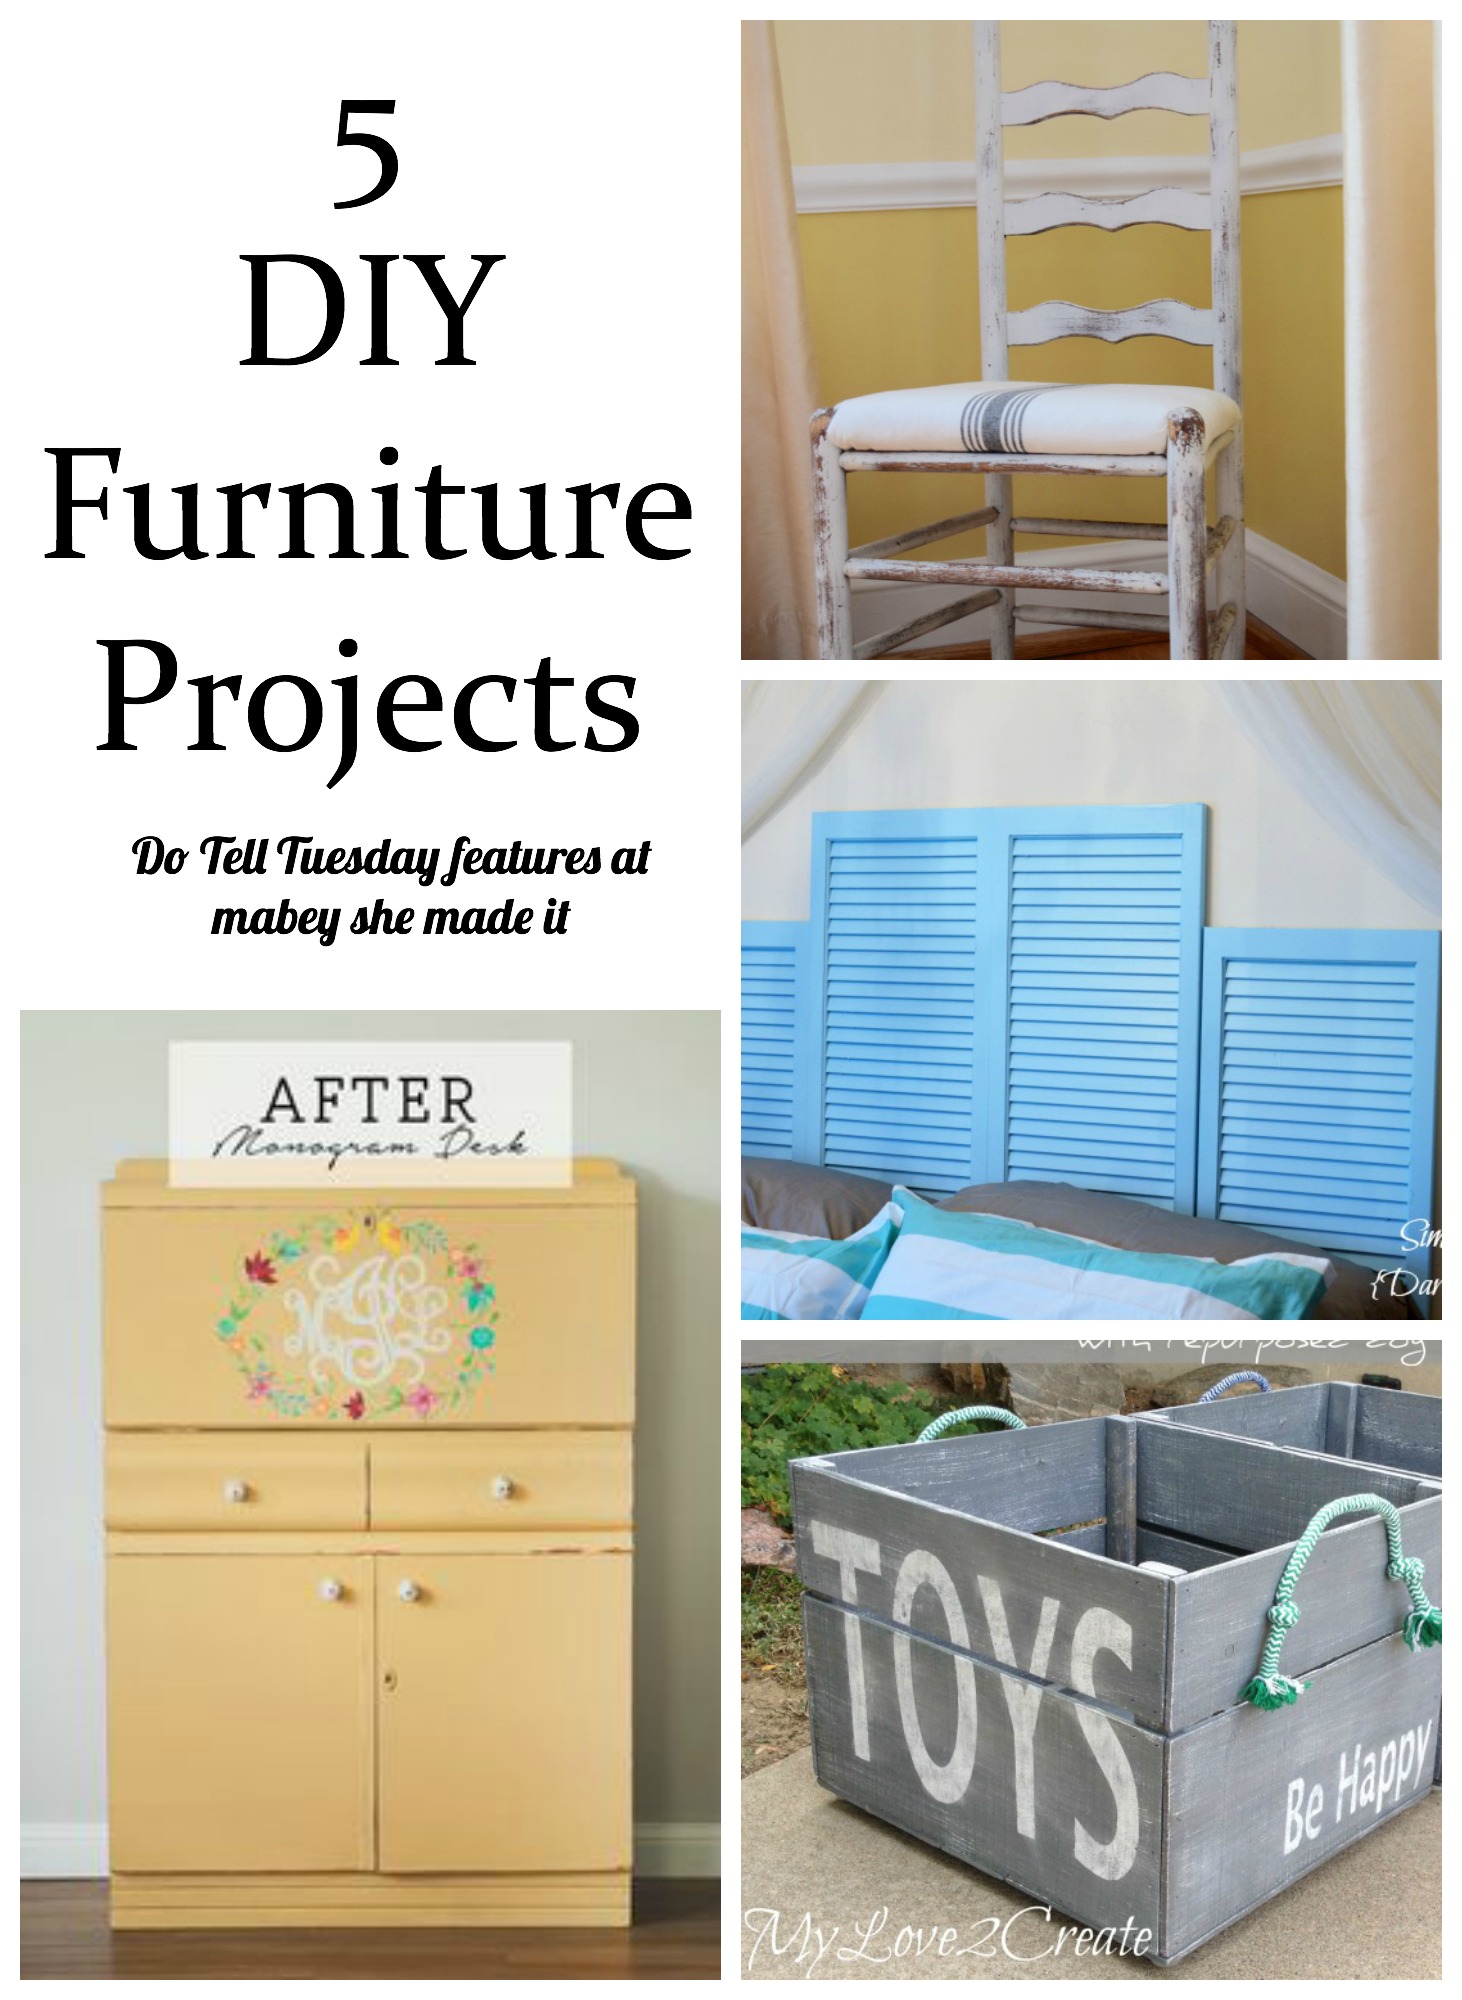 5 DIY Furniture Projects